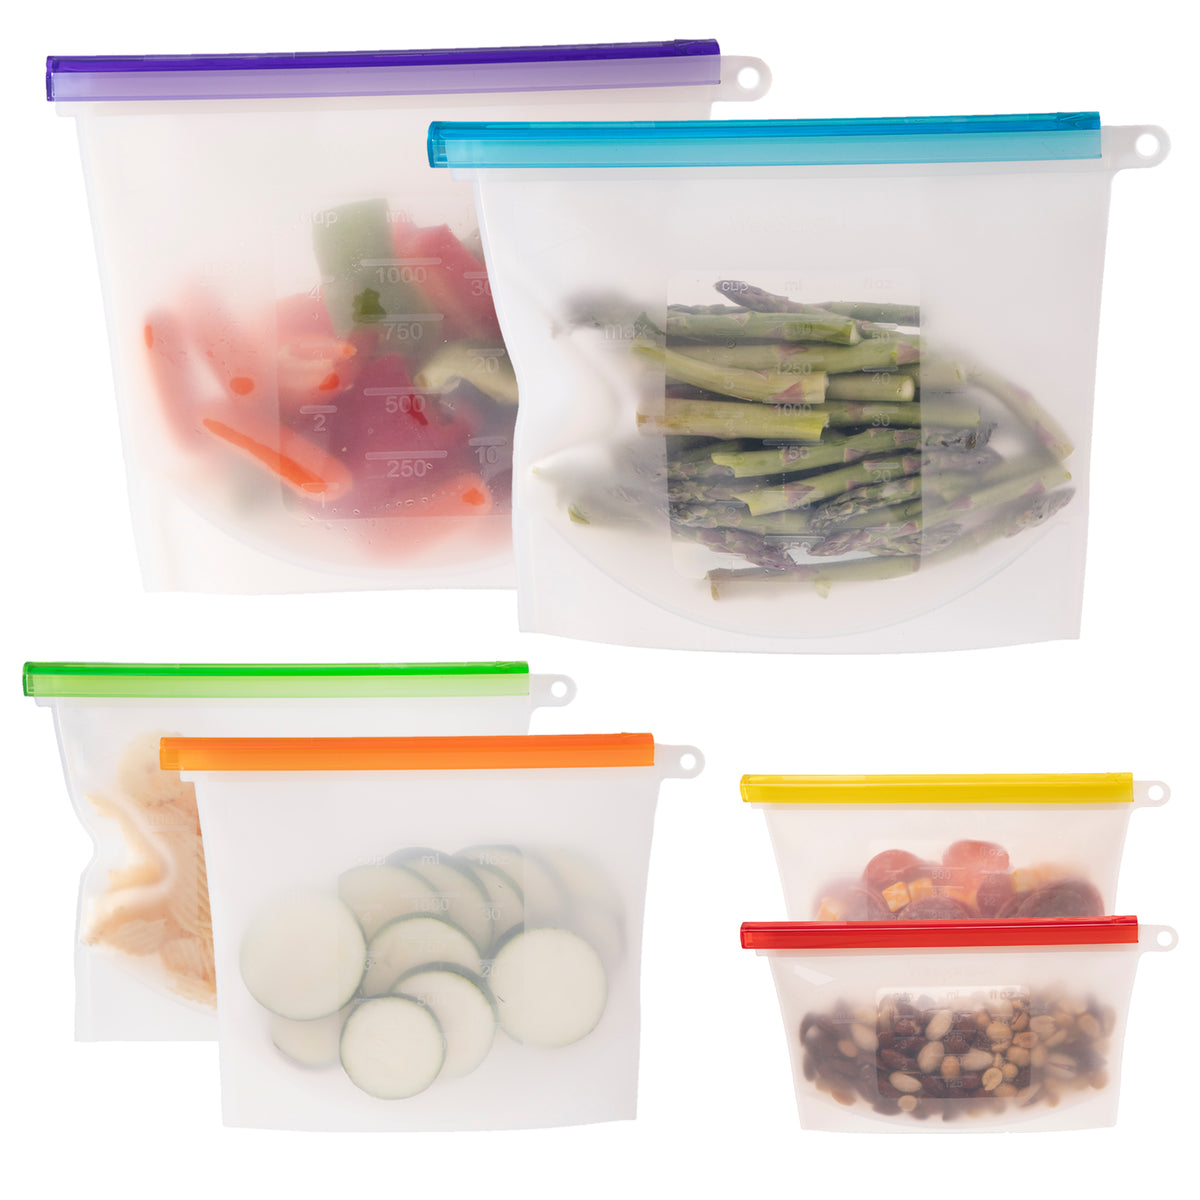  20 Pack Reusable Food Storage Bags and 1 Silicone Bag